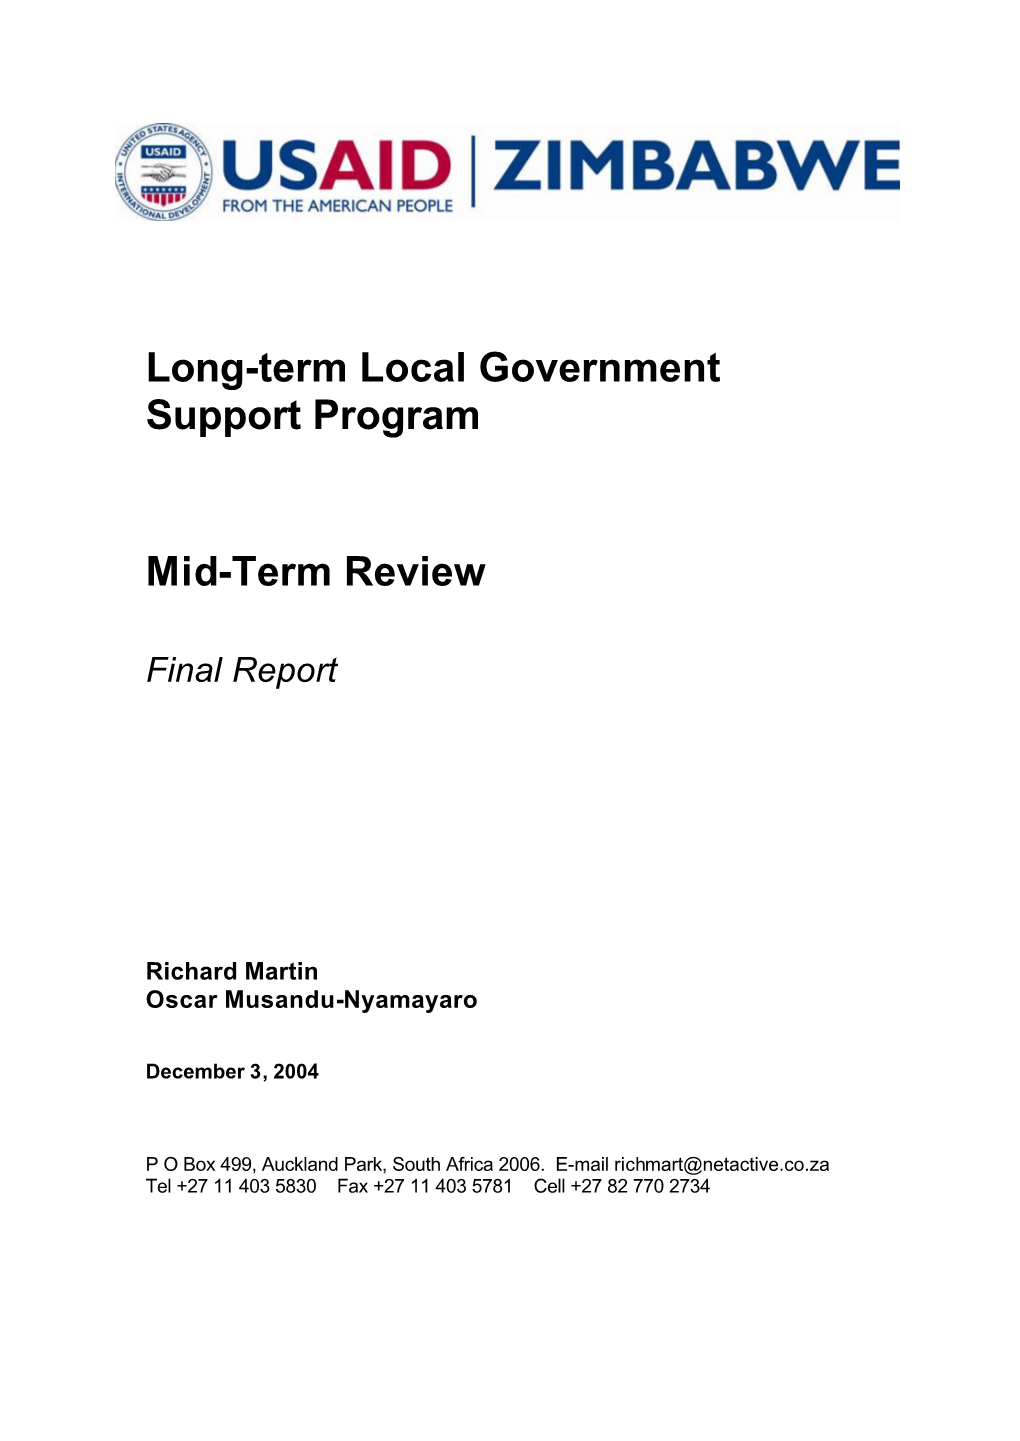 Long-Term Local Government Support Program Mid-Term